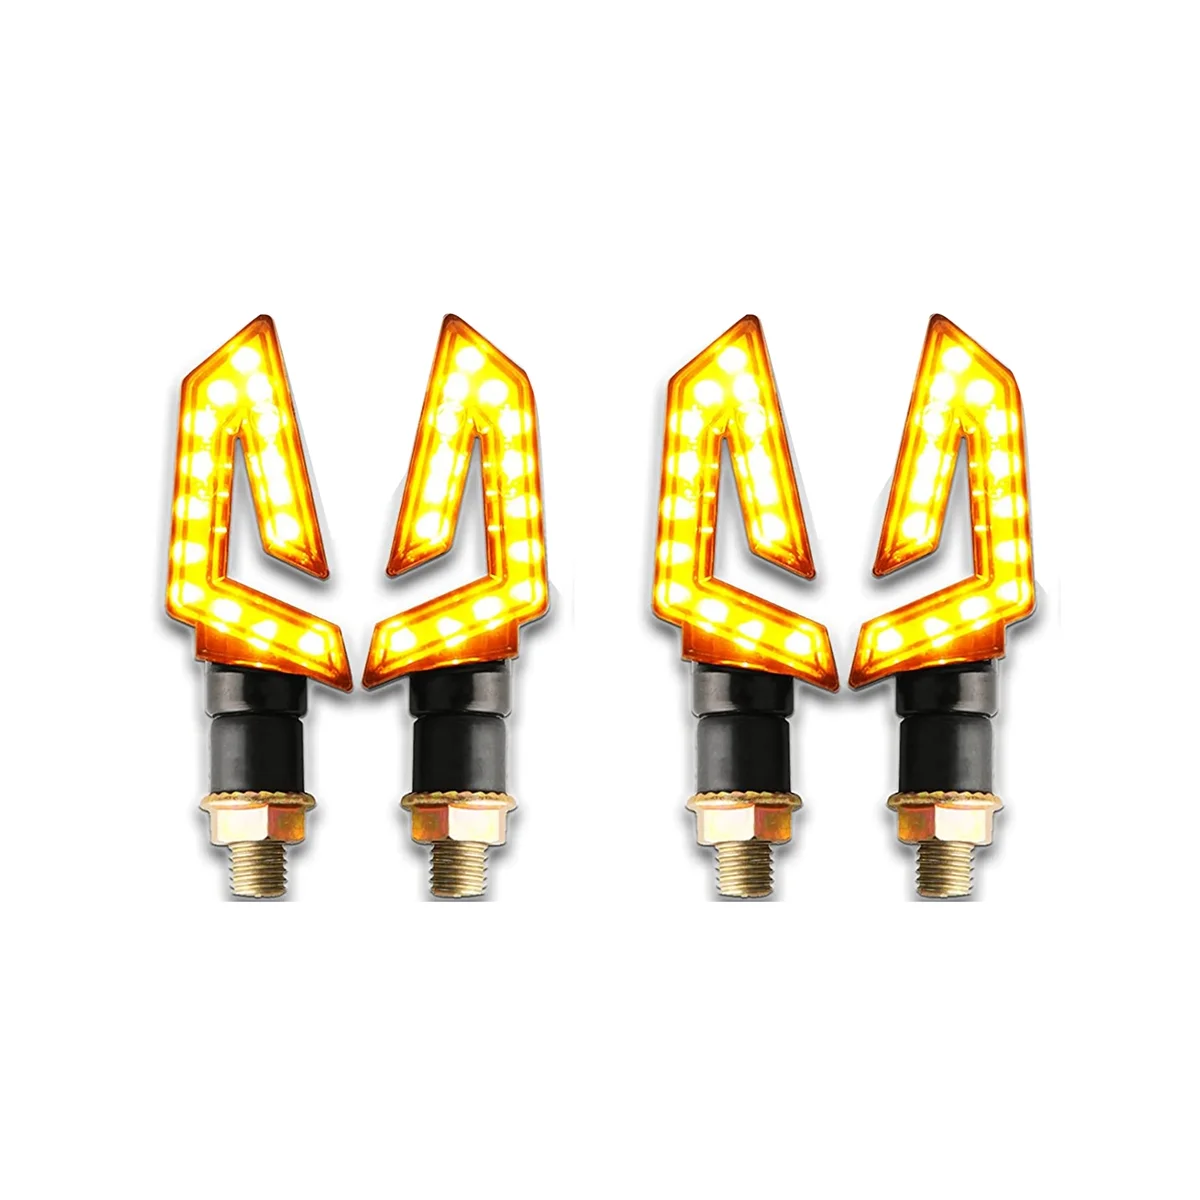 

4PCS Arrow Motorcycle Turn Signals 15LED Motorcycle Blinkers Indicators Amber Lamp for Motorbike Scooter Quad Cruiser